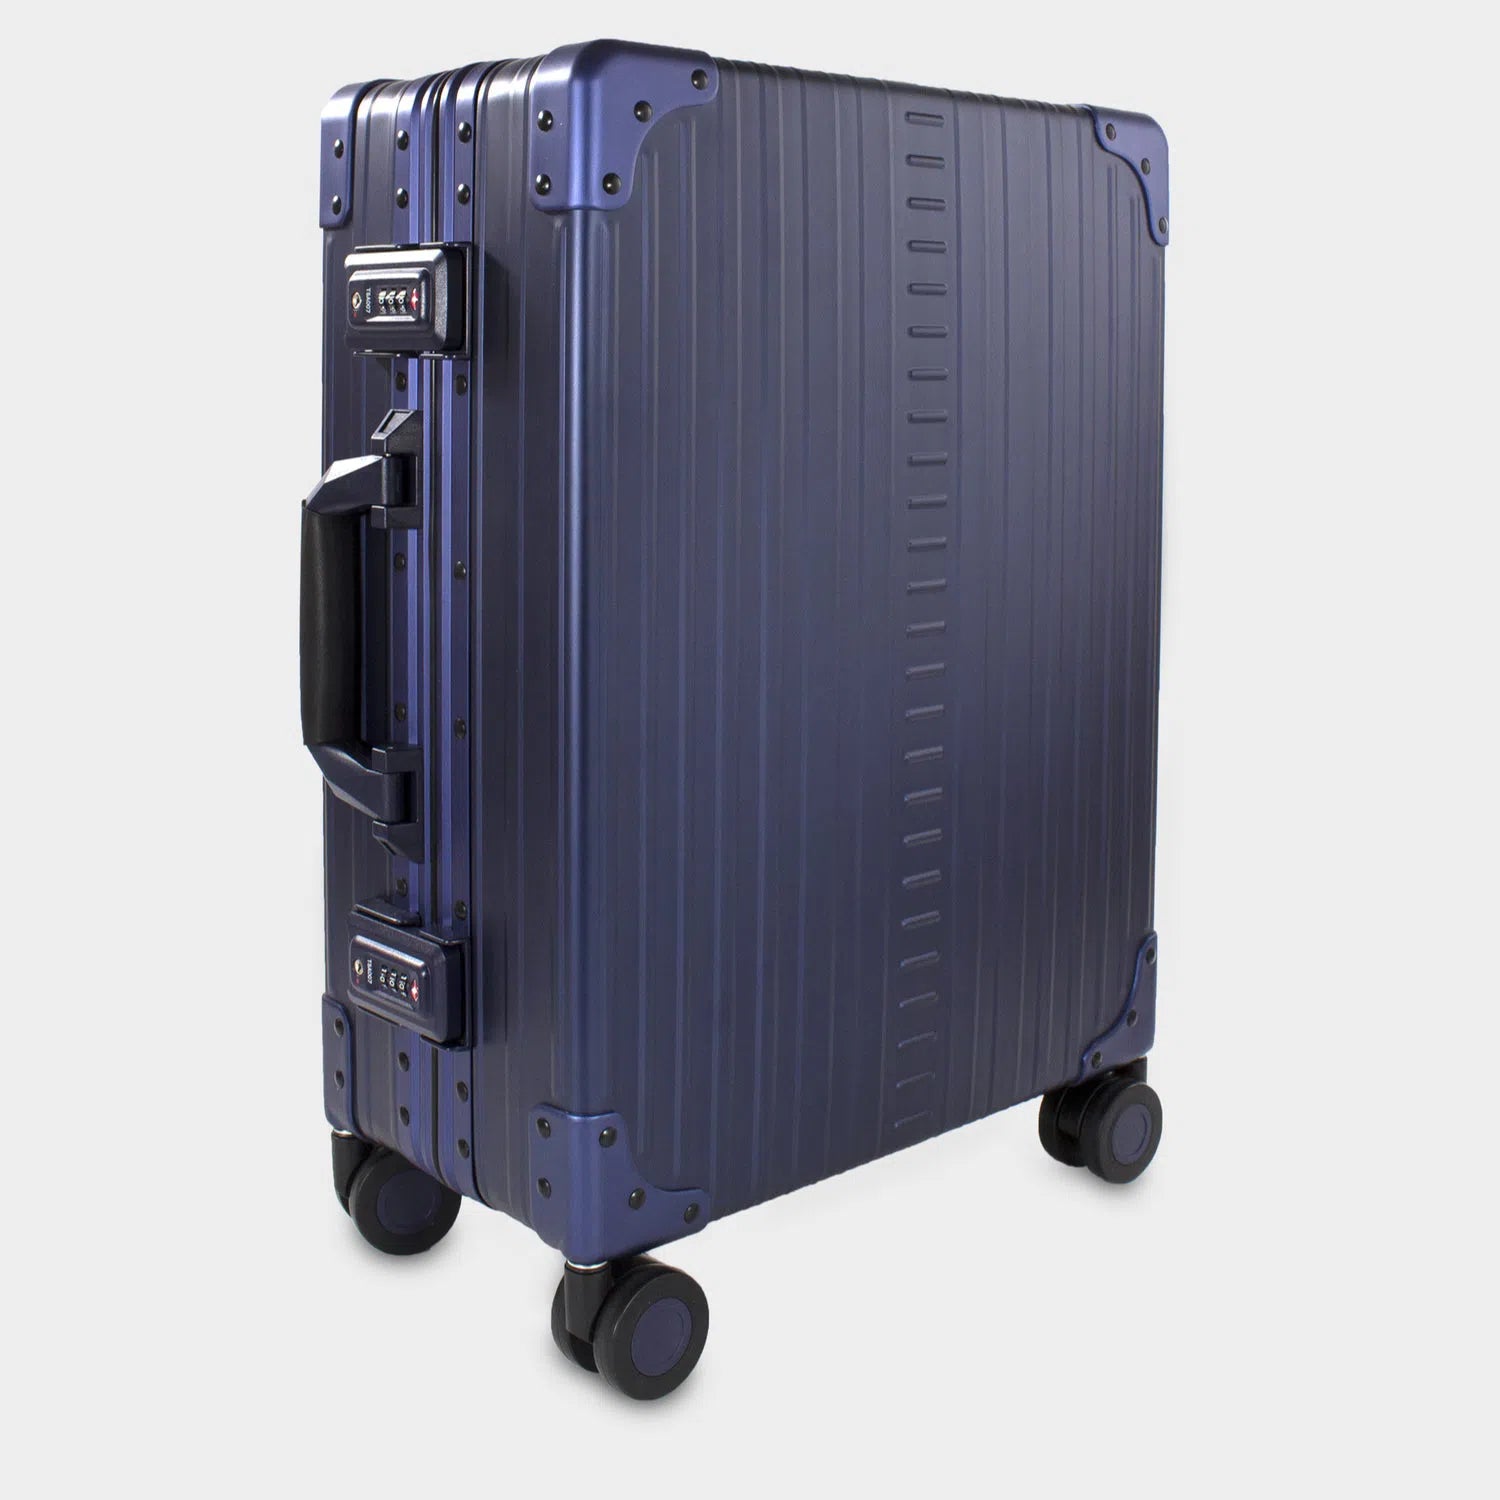 ALEON 21" International Carry-On Trolley sapphire hover